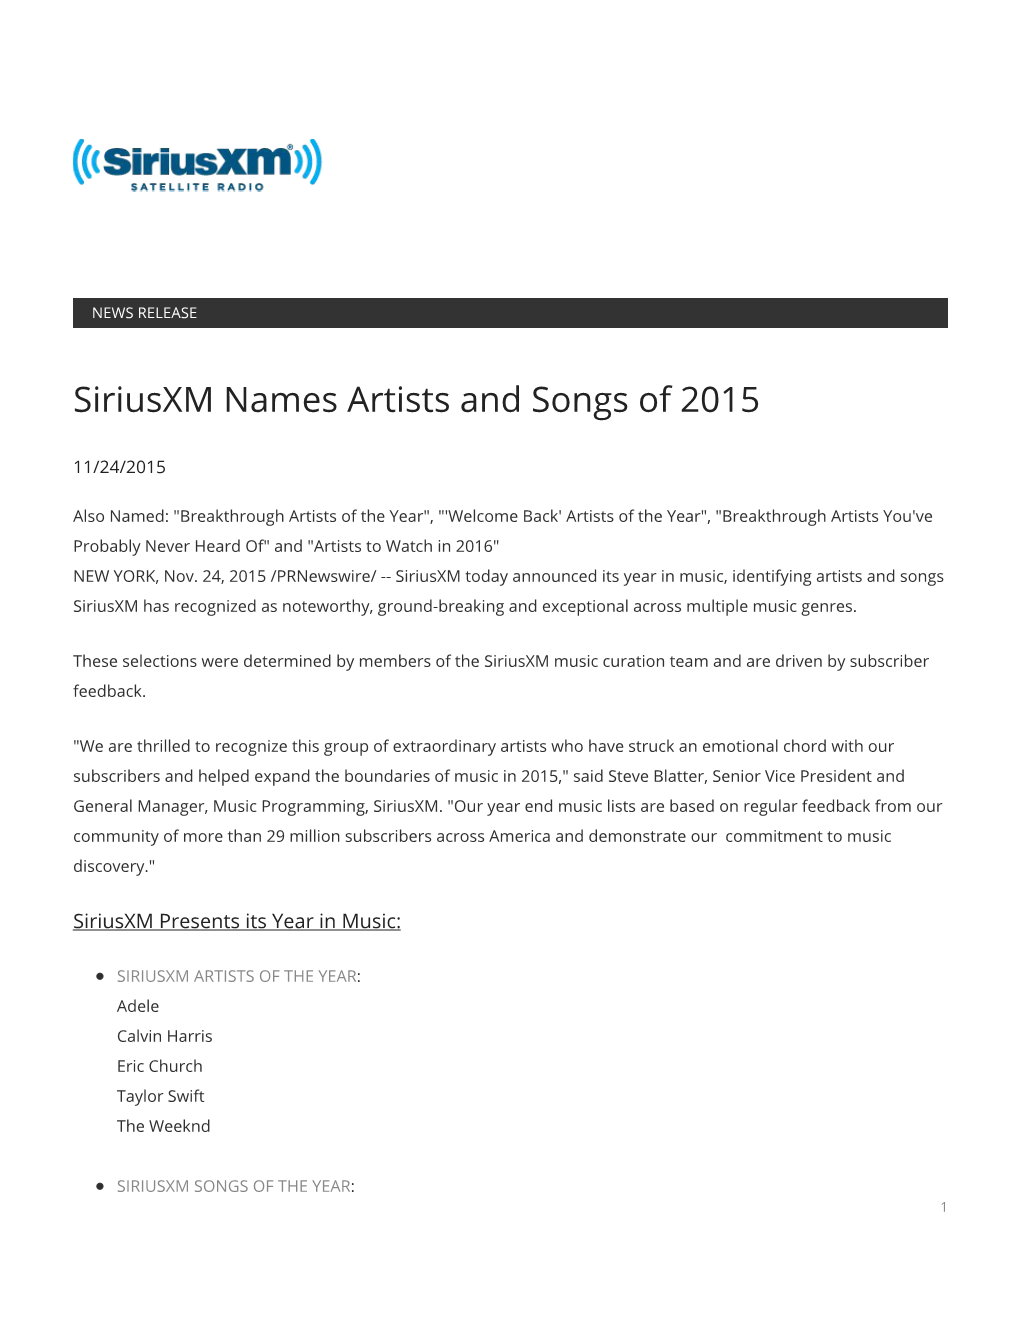 Siriusxm Names Artists and Songs of 2015